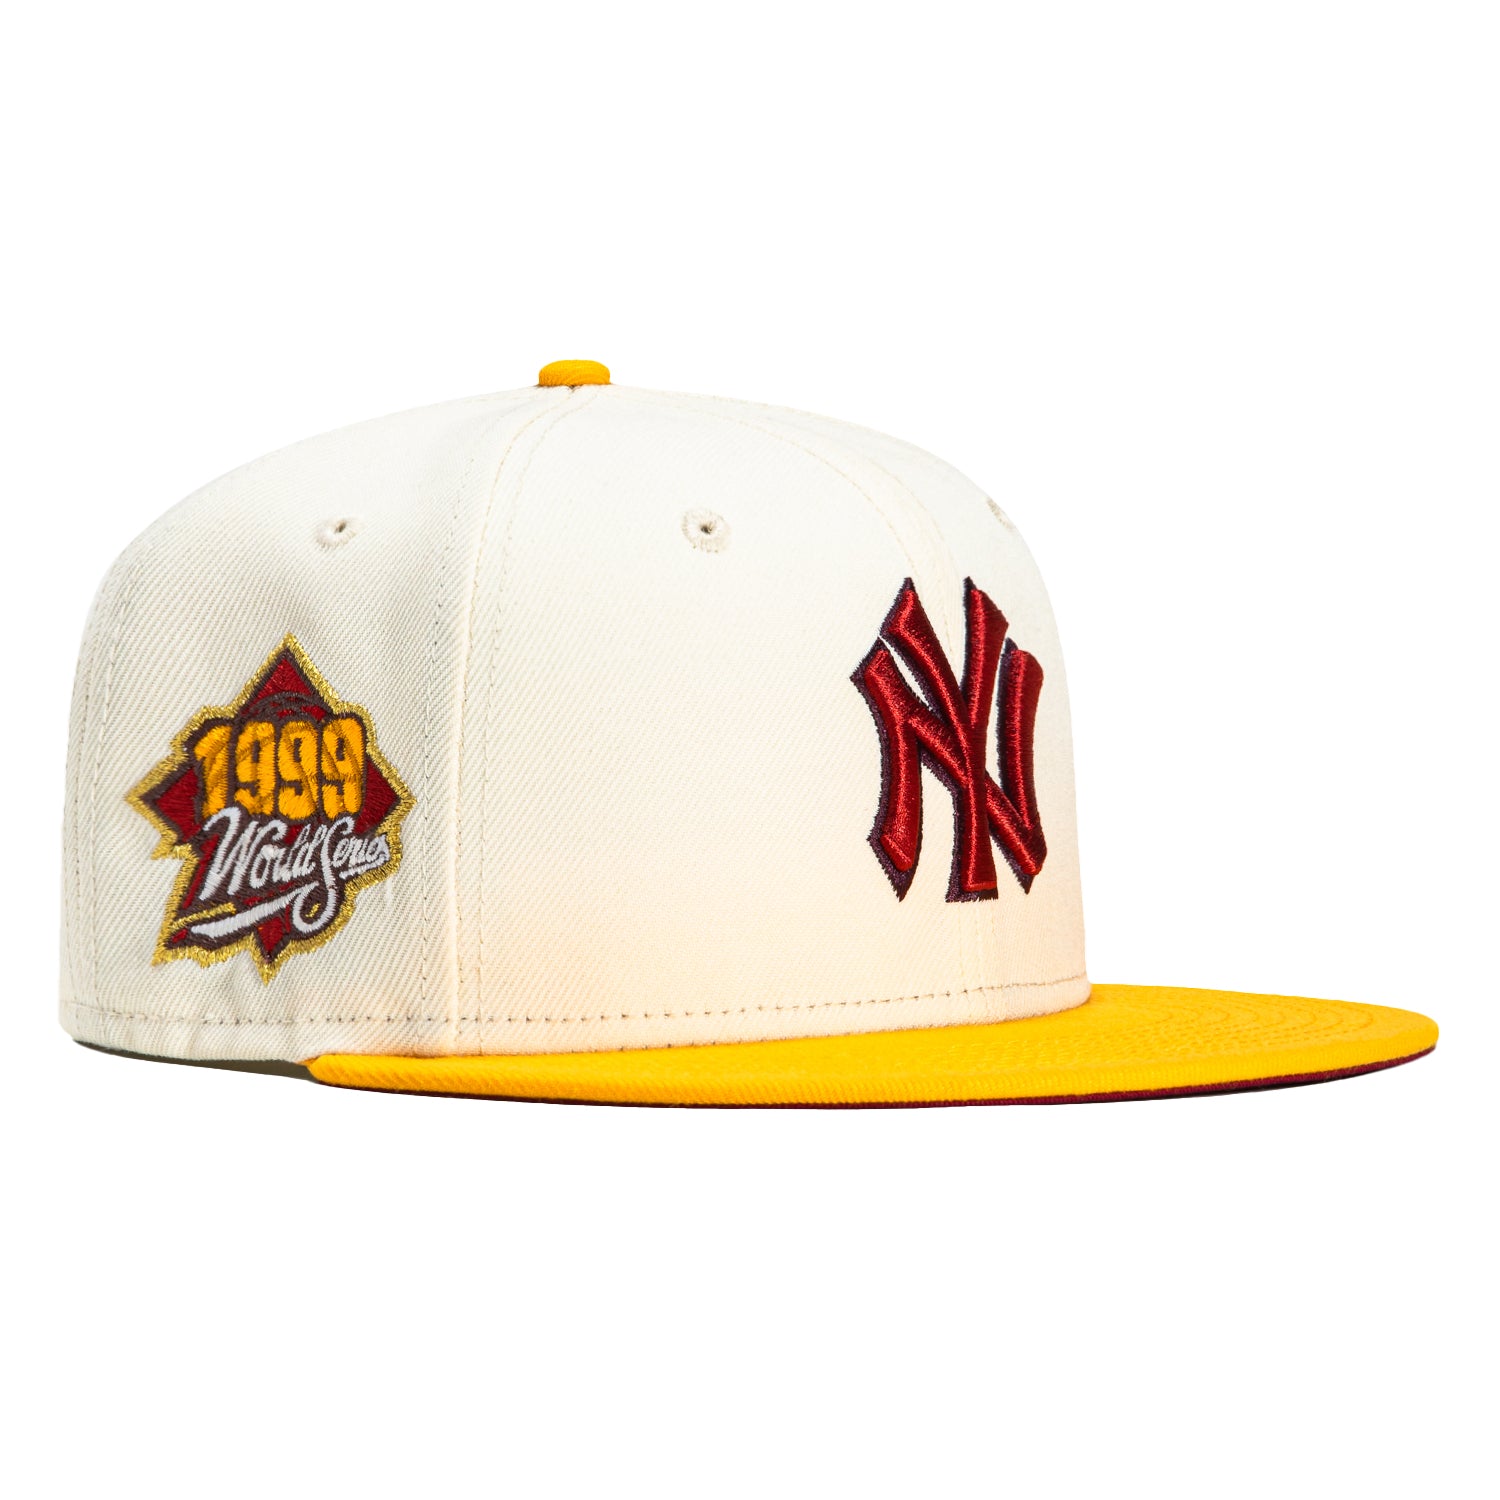 New Era 59FIFTY Peaches and Cream New York Yankees 1999 World Series Patch Hat - White, Gold White/Gold / 7 1/8